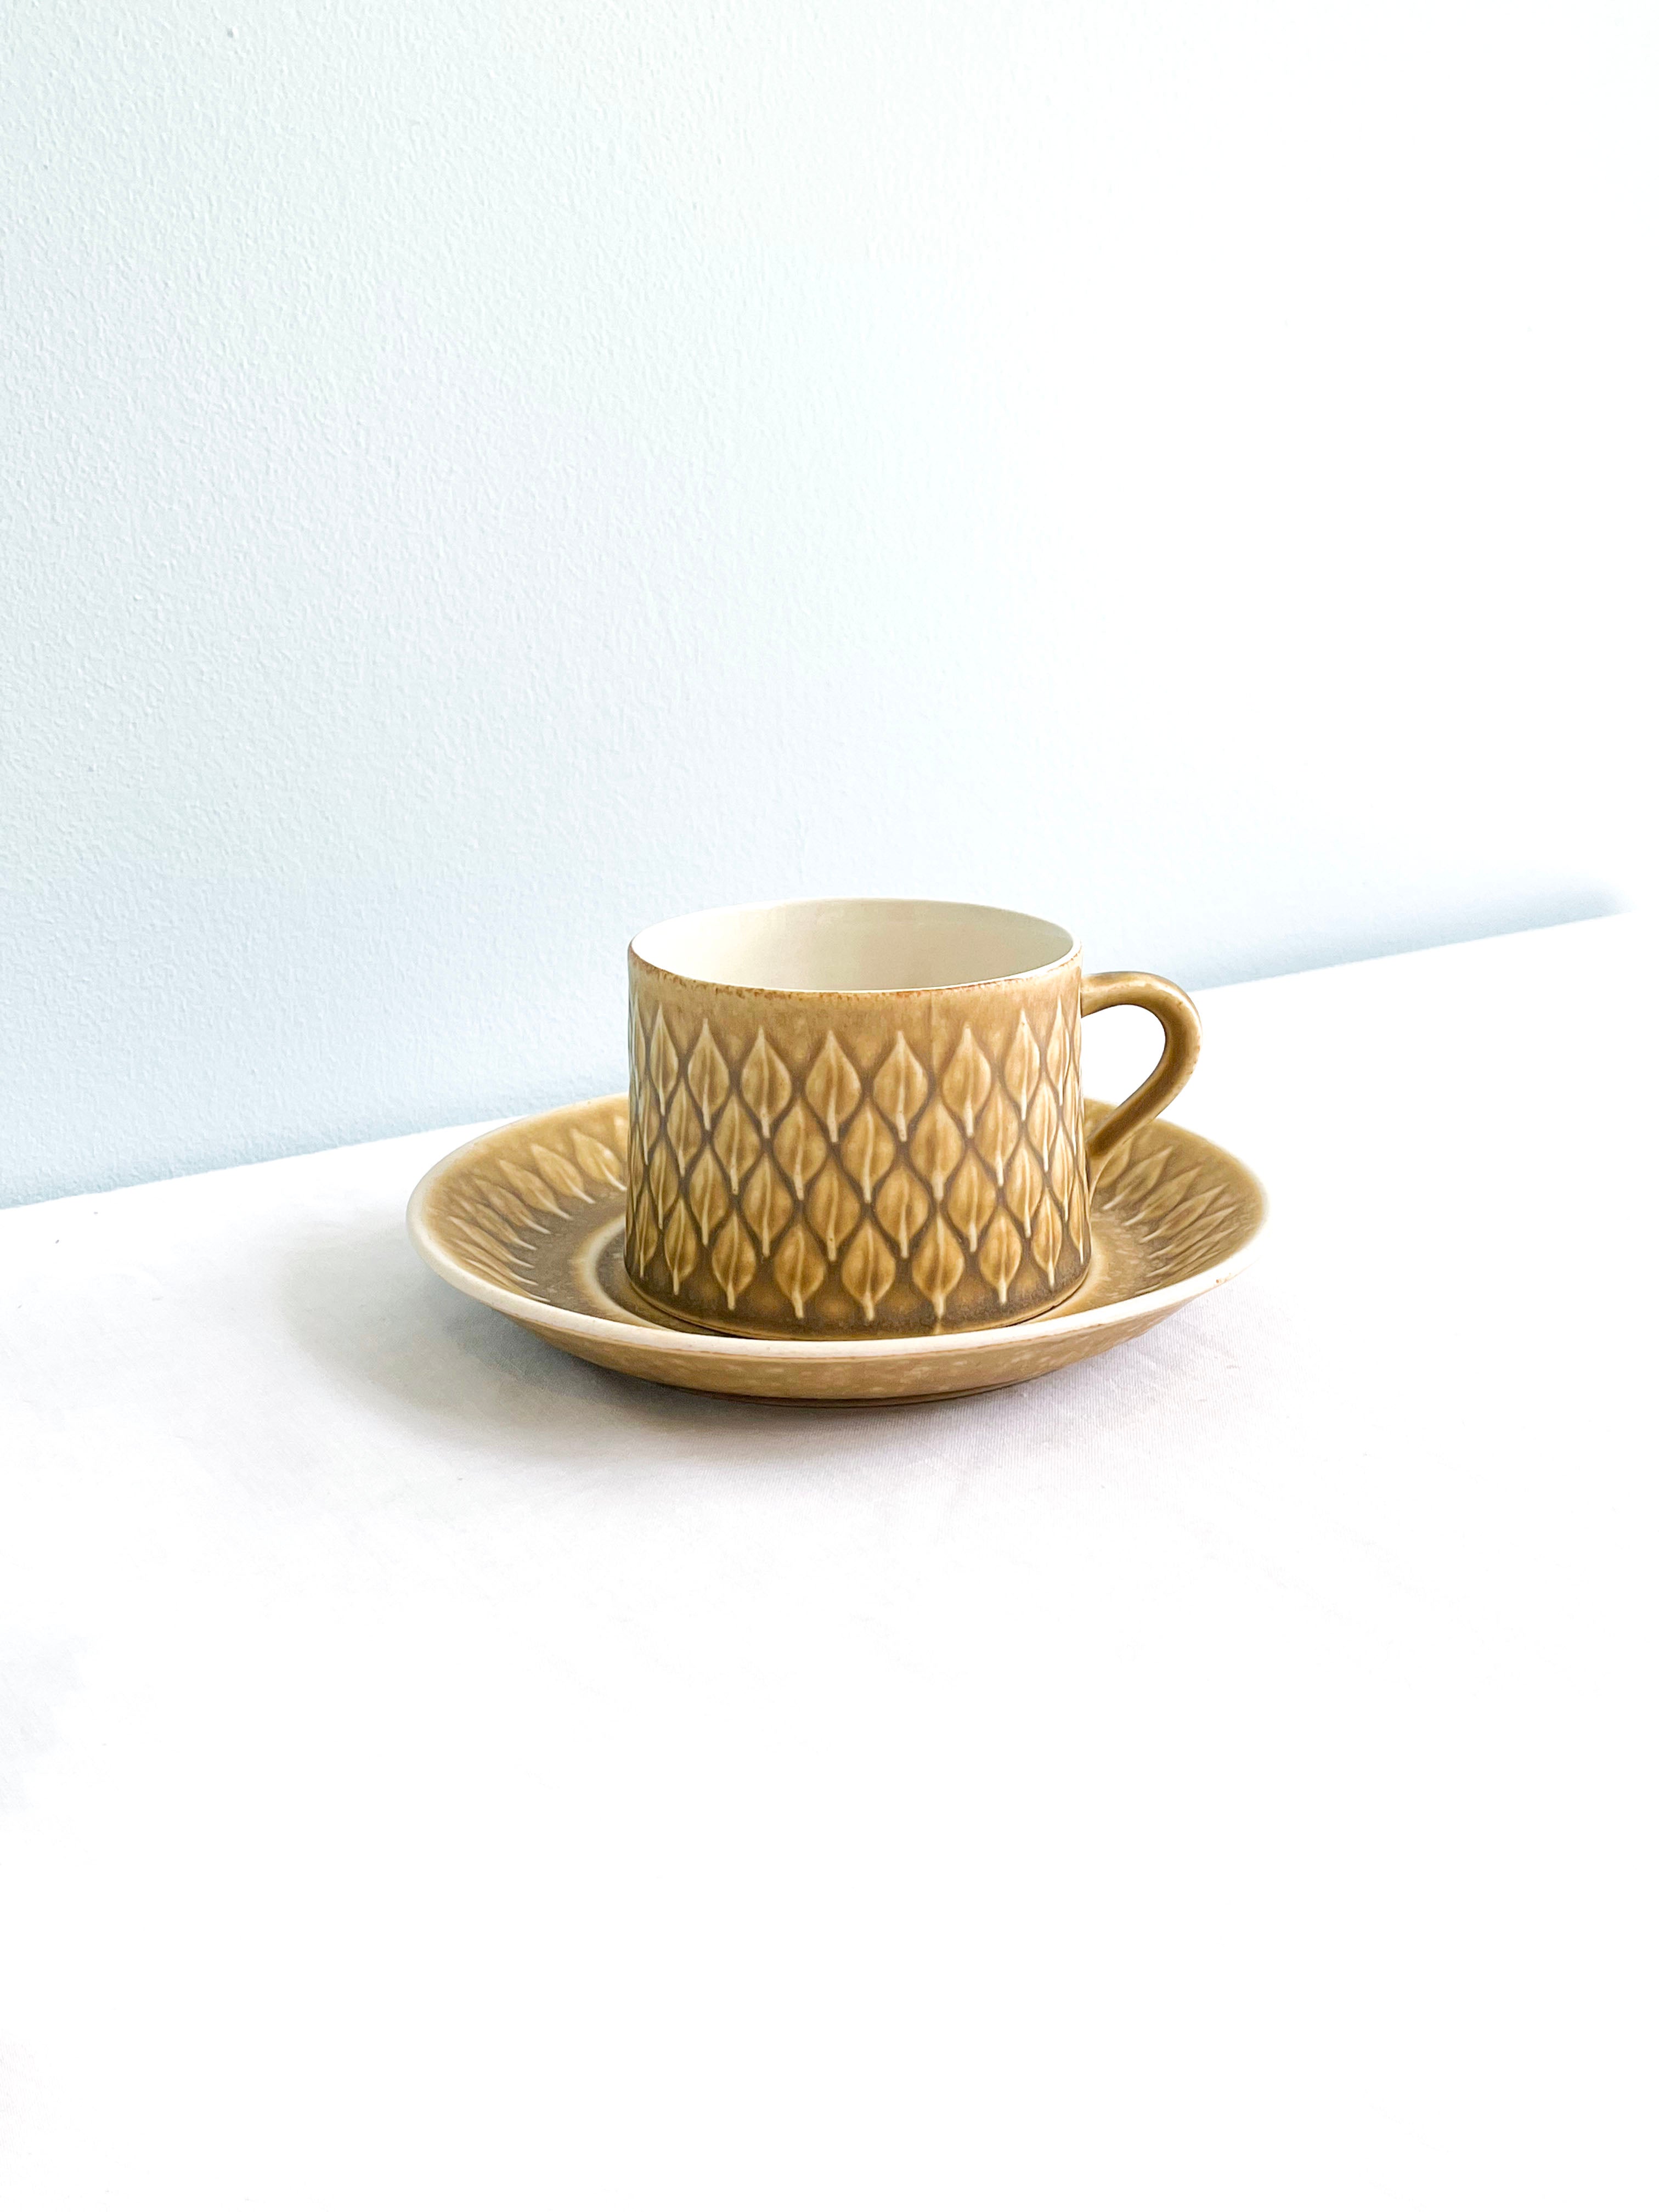 Jens H.Quistgaard Relief Teacup and Saucer/レリーフ ティーカップアンドソーサー イェンス・クイストゴー 北欧ヴィンテージ食器